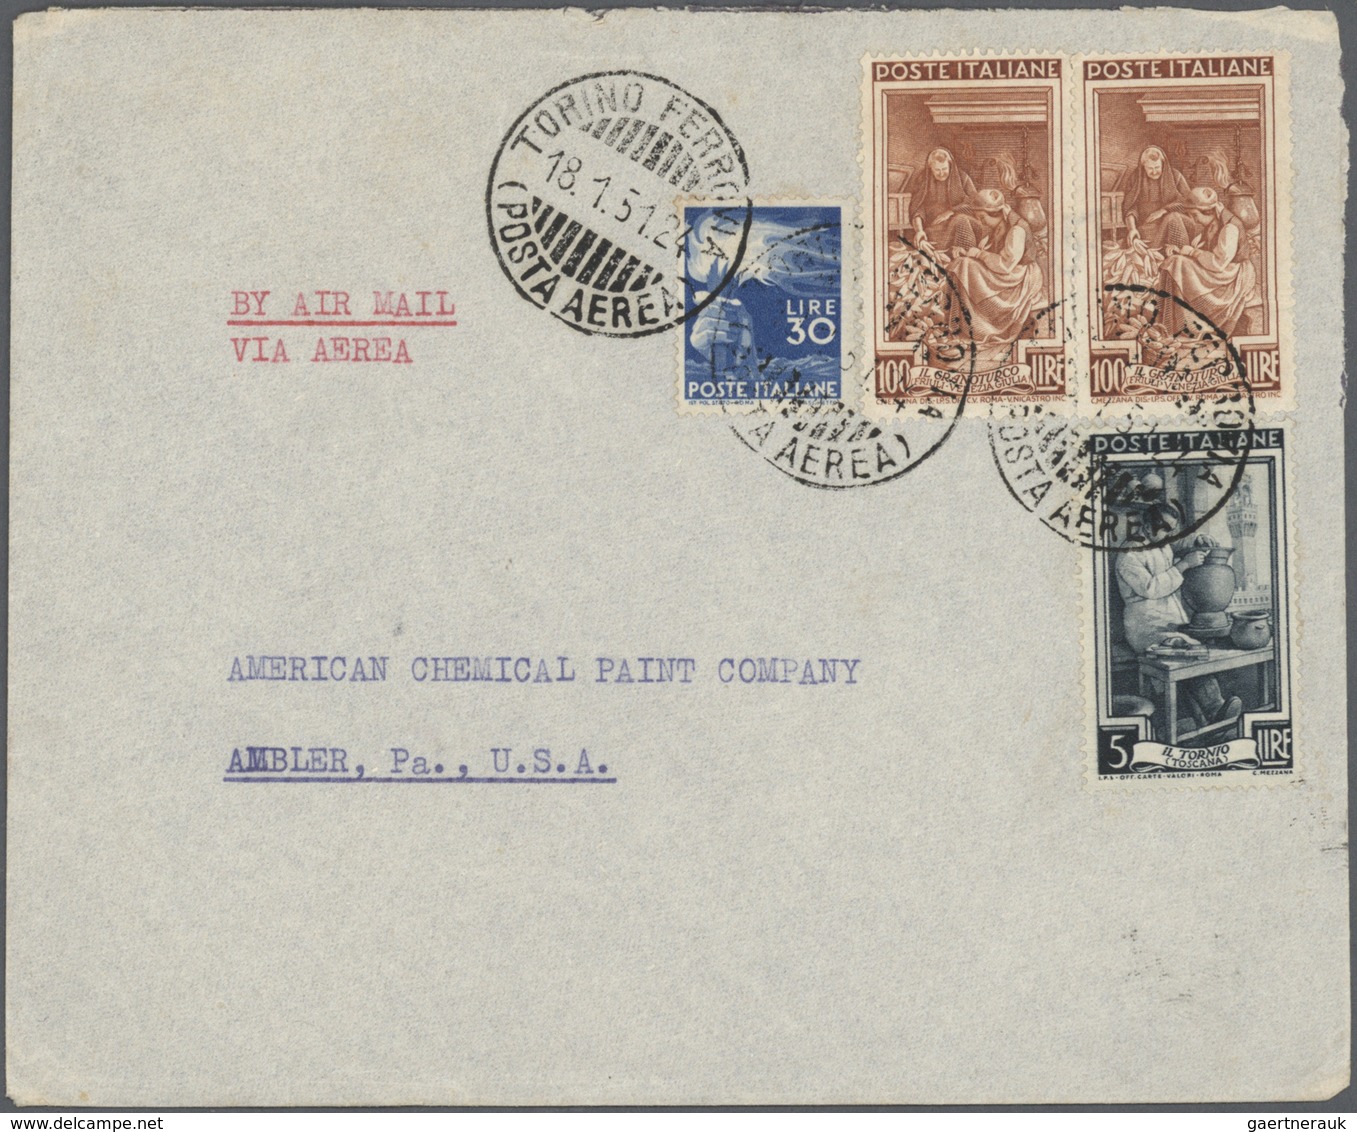 Br Italien: 1951/1954, collection of apprx. 120 commercial entires bearing frankings "Italia al Lavoro"